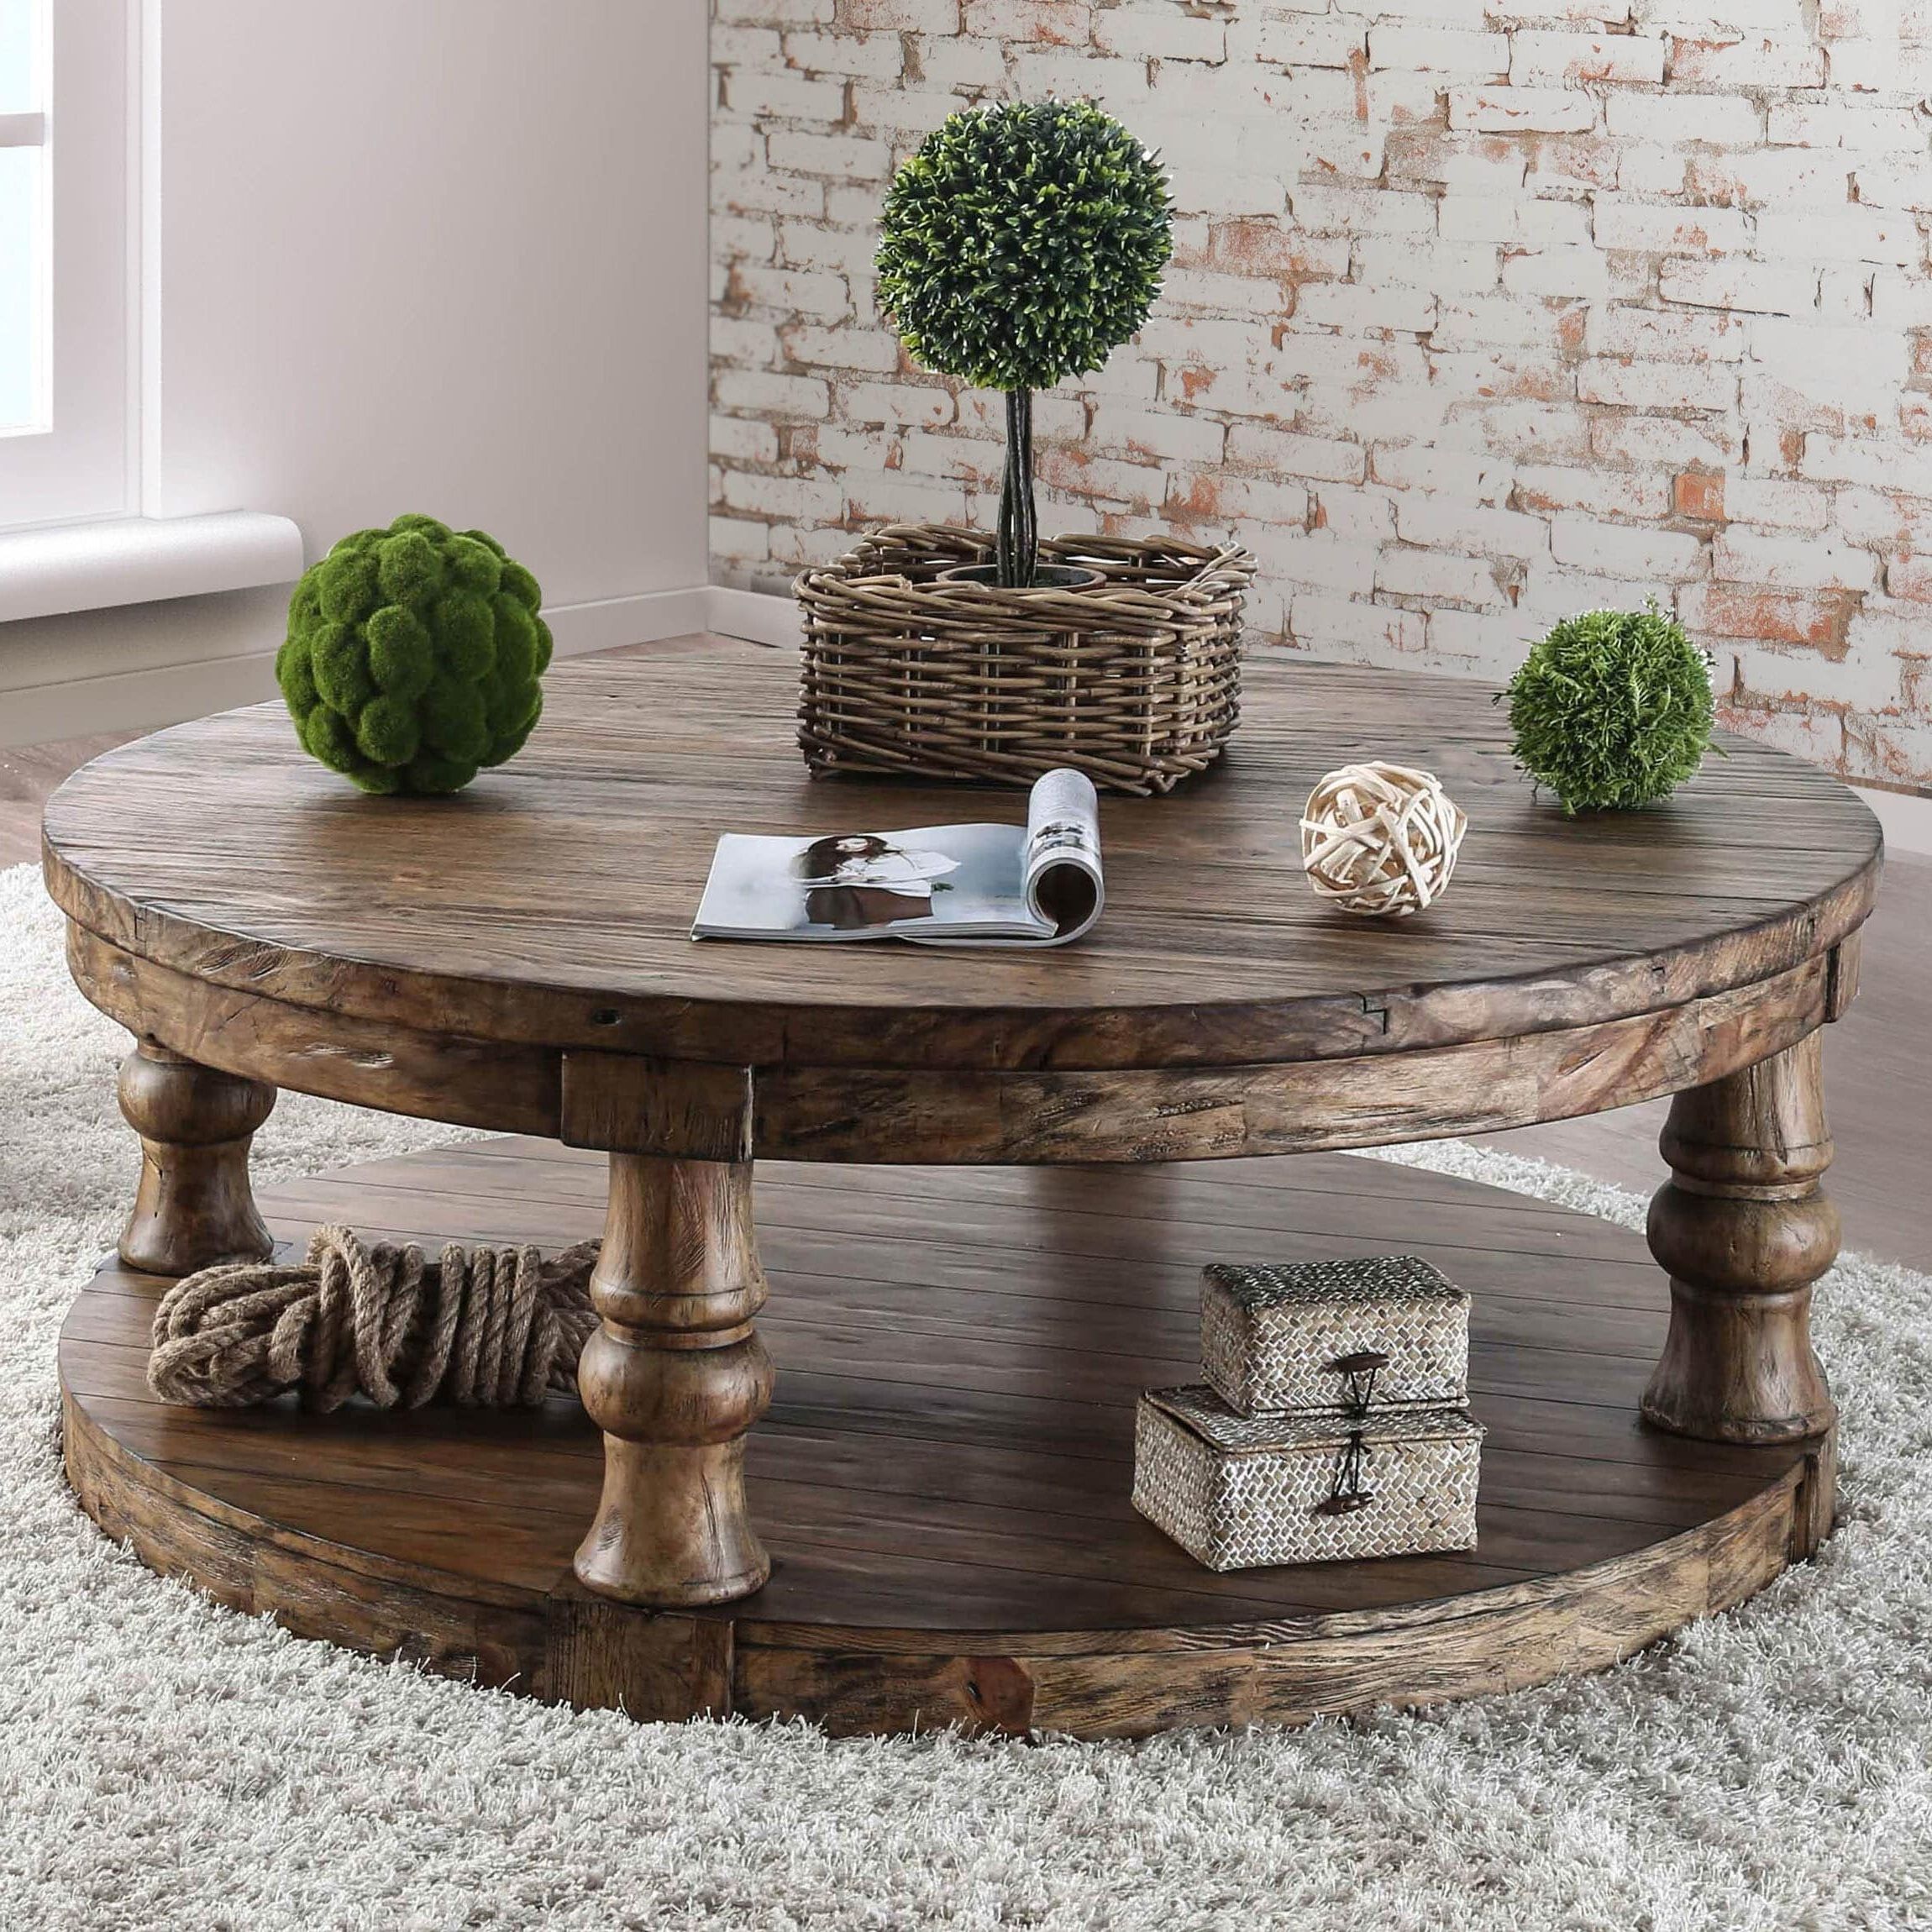 Round Rustic Coffee Table Sets – Rustic Coffee Tables That You Need To Regarding Rustic Wood Coffee Tables (View 18 of 20)